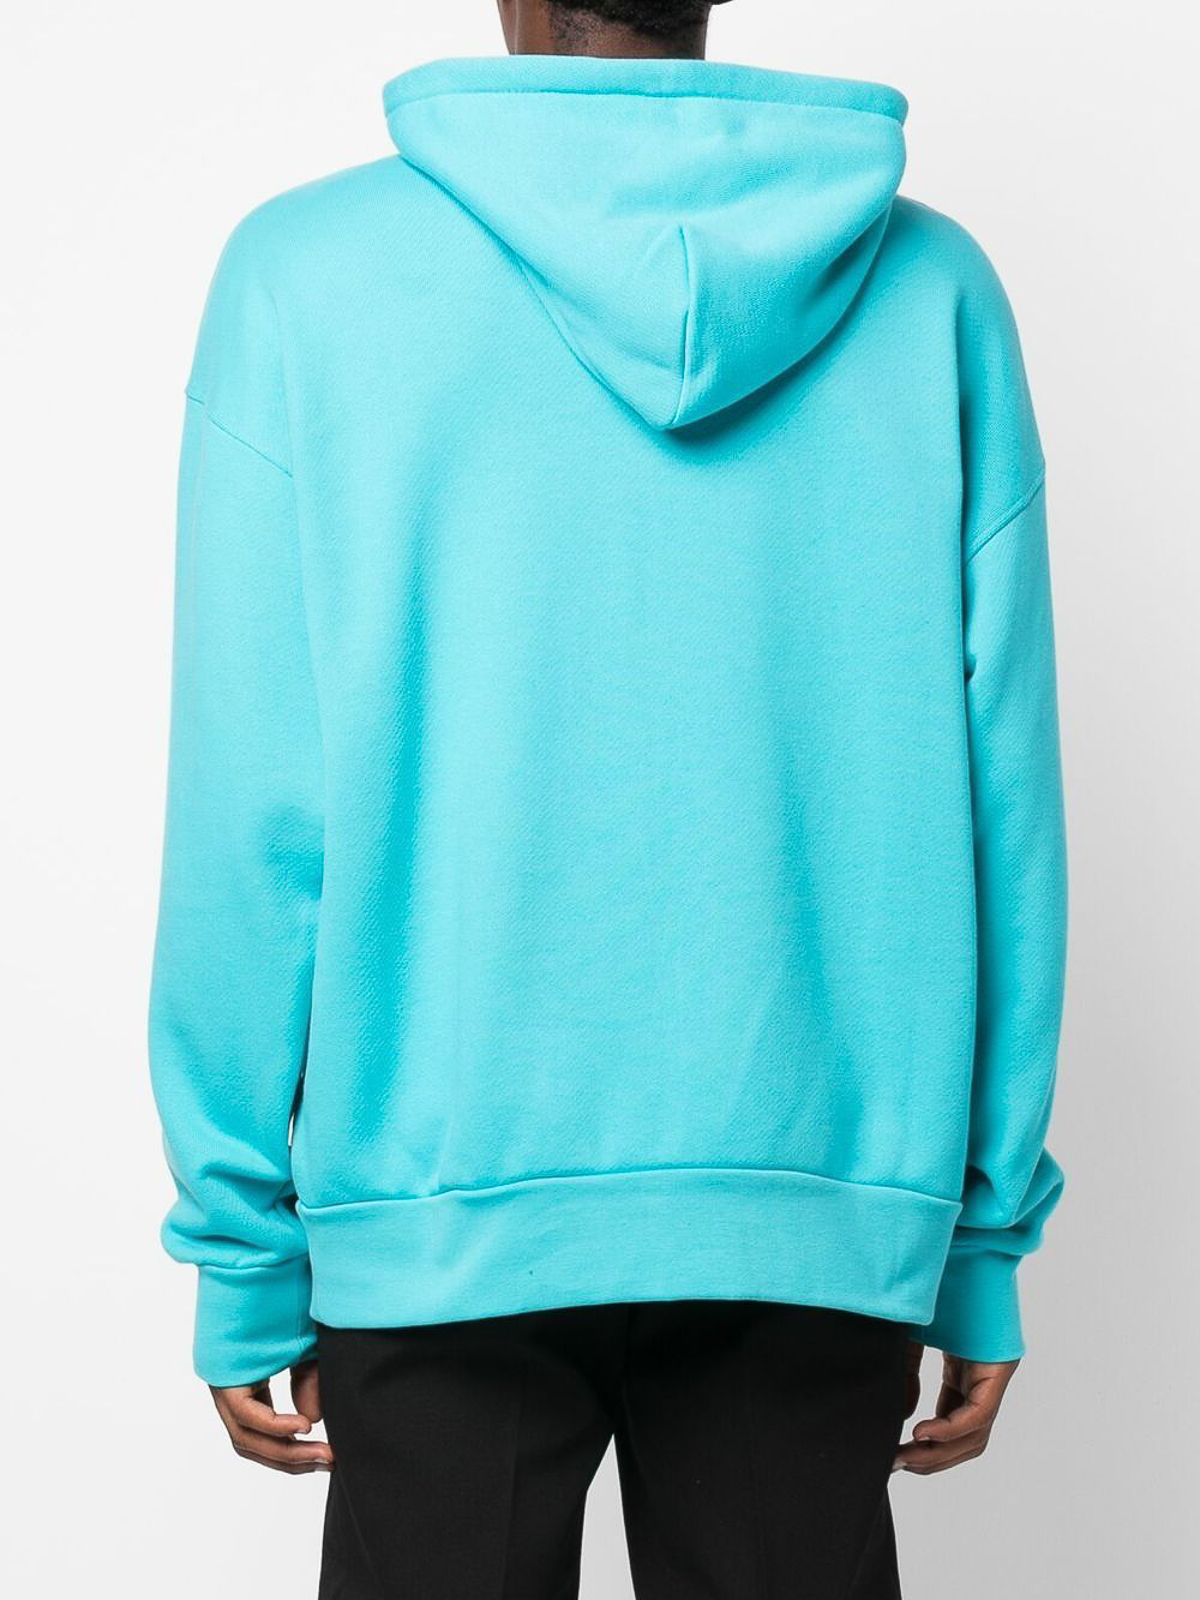 Shop Botter Embroidered Organic Cotton Hoodie In Blue